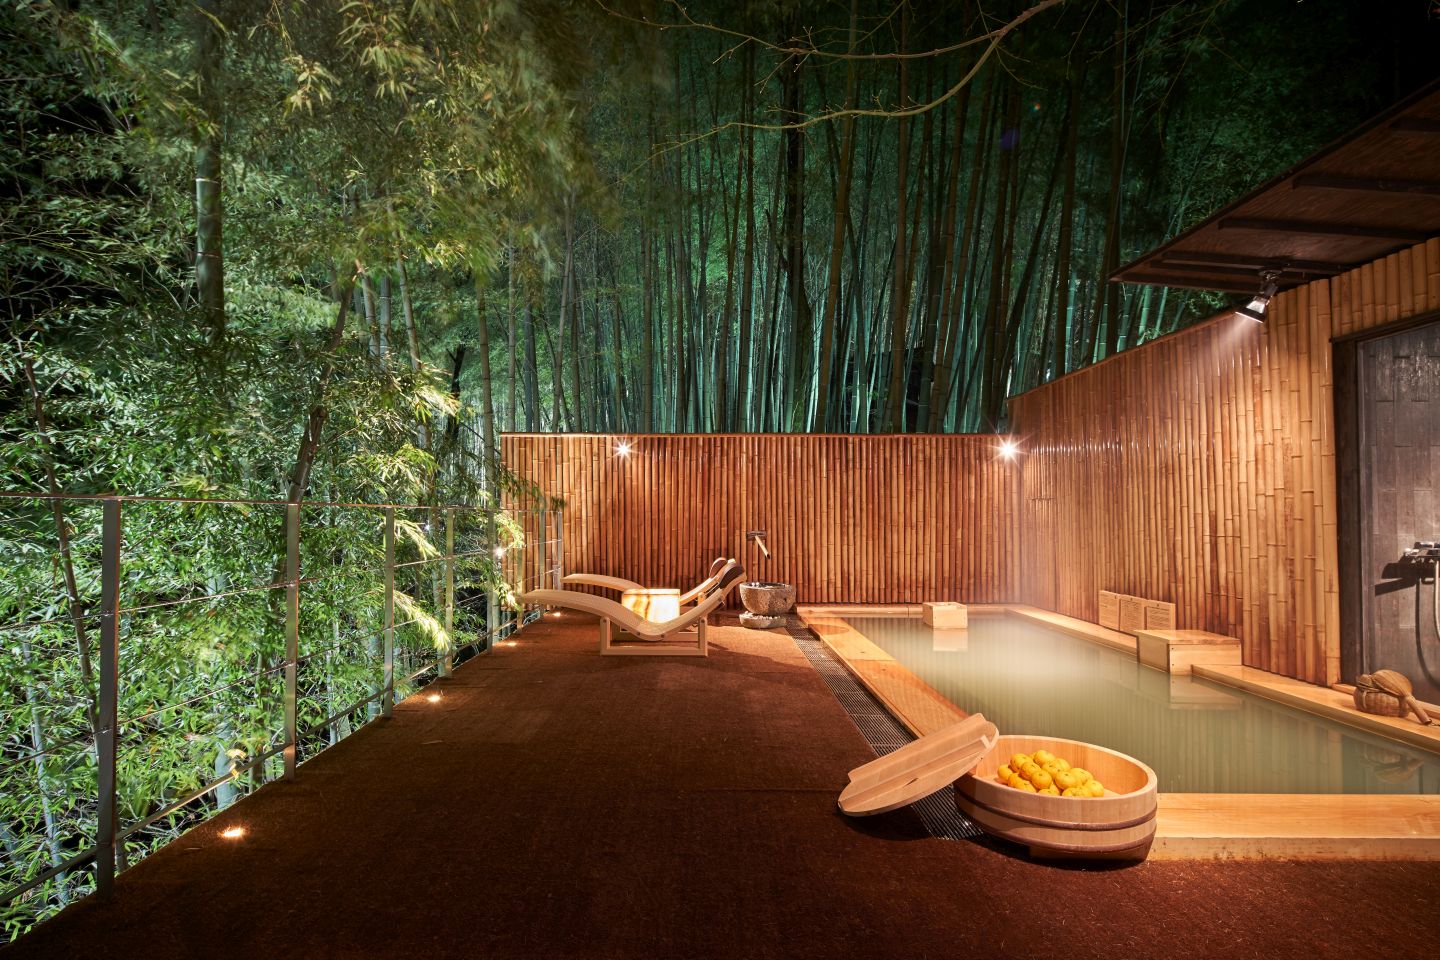 Japan’s southernmost main island of Kyūshū is the perfect place to sample the traditional ryokan experience, marrying hot springs and exquisite Japanese hospitality.